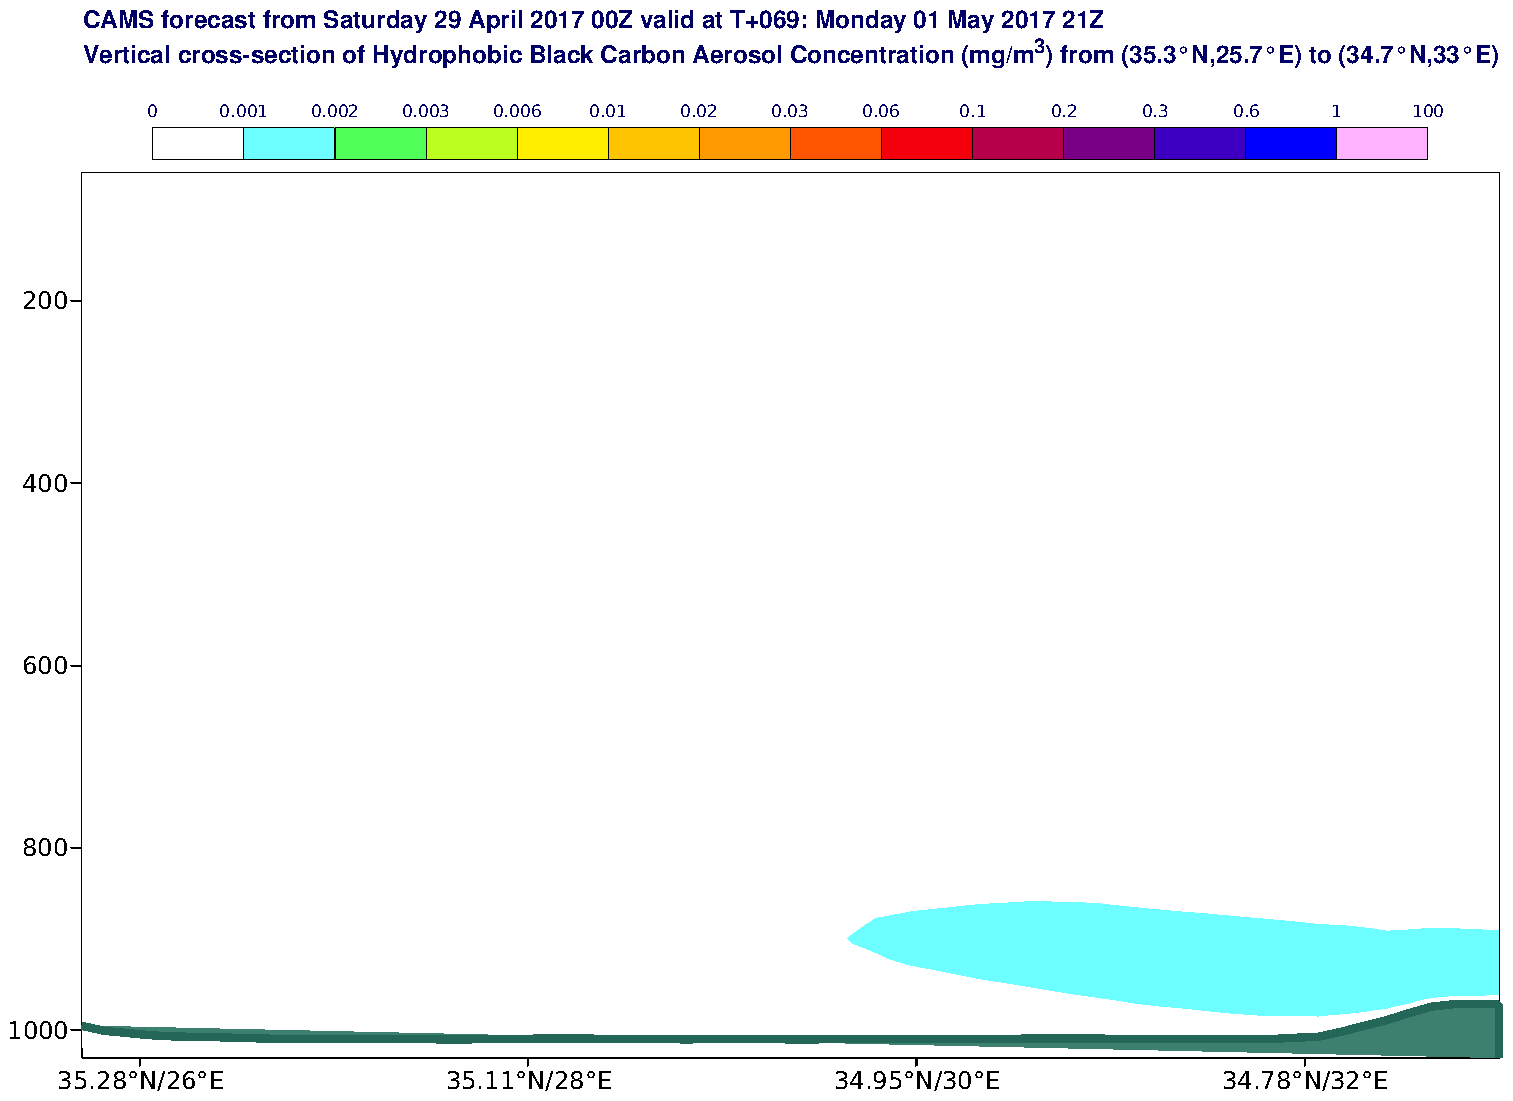 Vertical cross-section of Hydrophobic Black Carbon Aerosol Concentration (mg/m3) valid at T69 - 2017-05-01 21:00